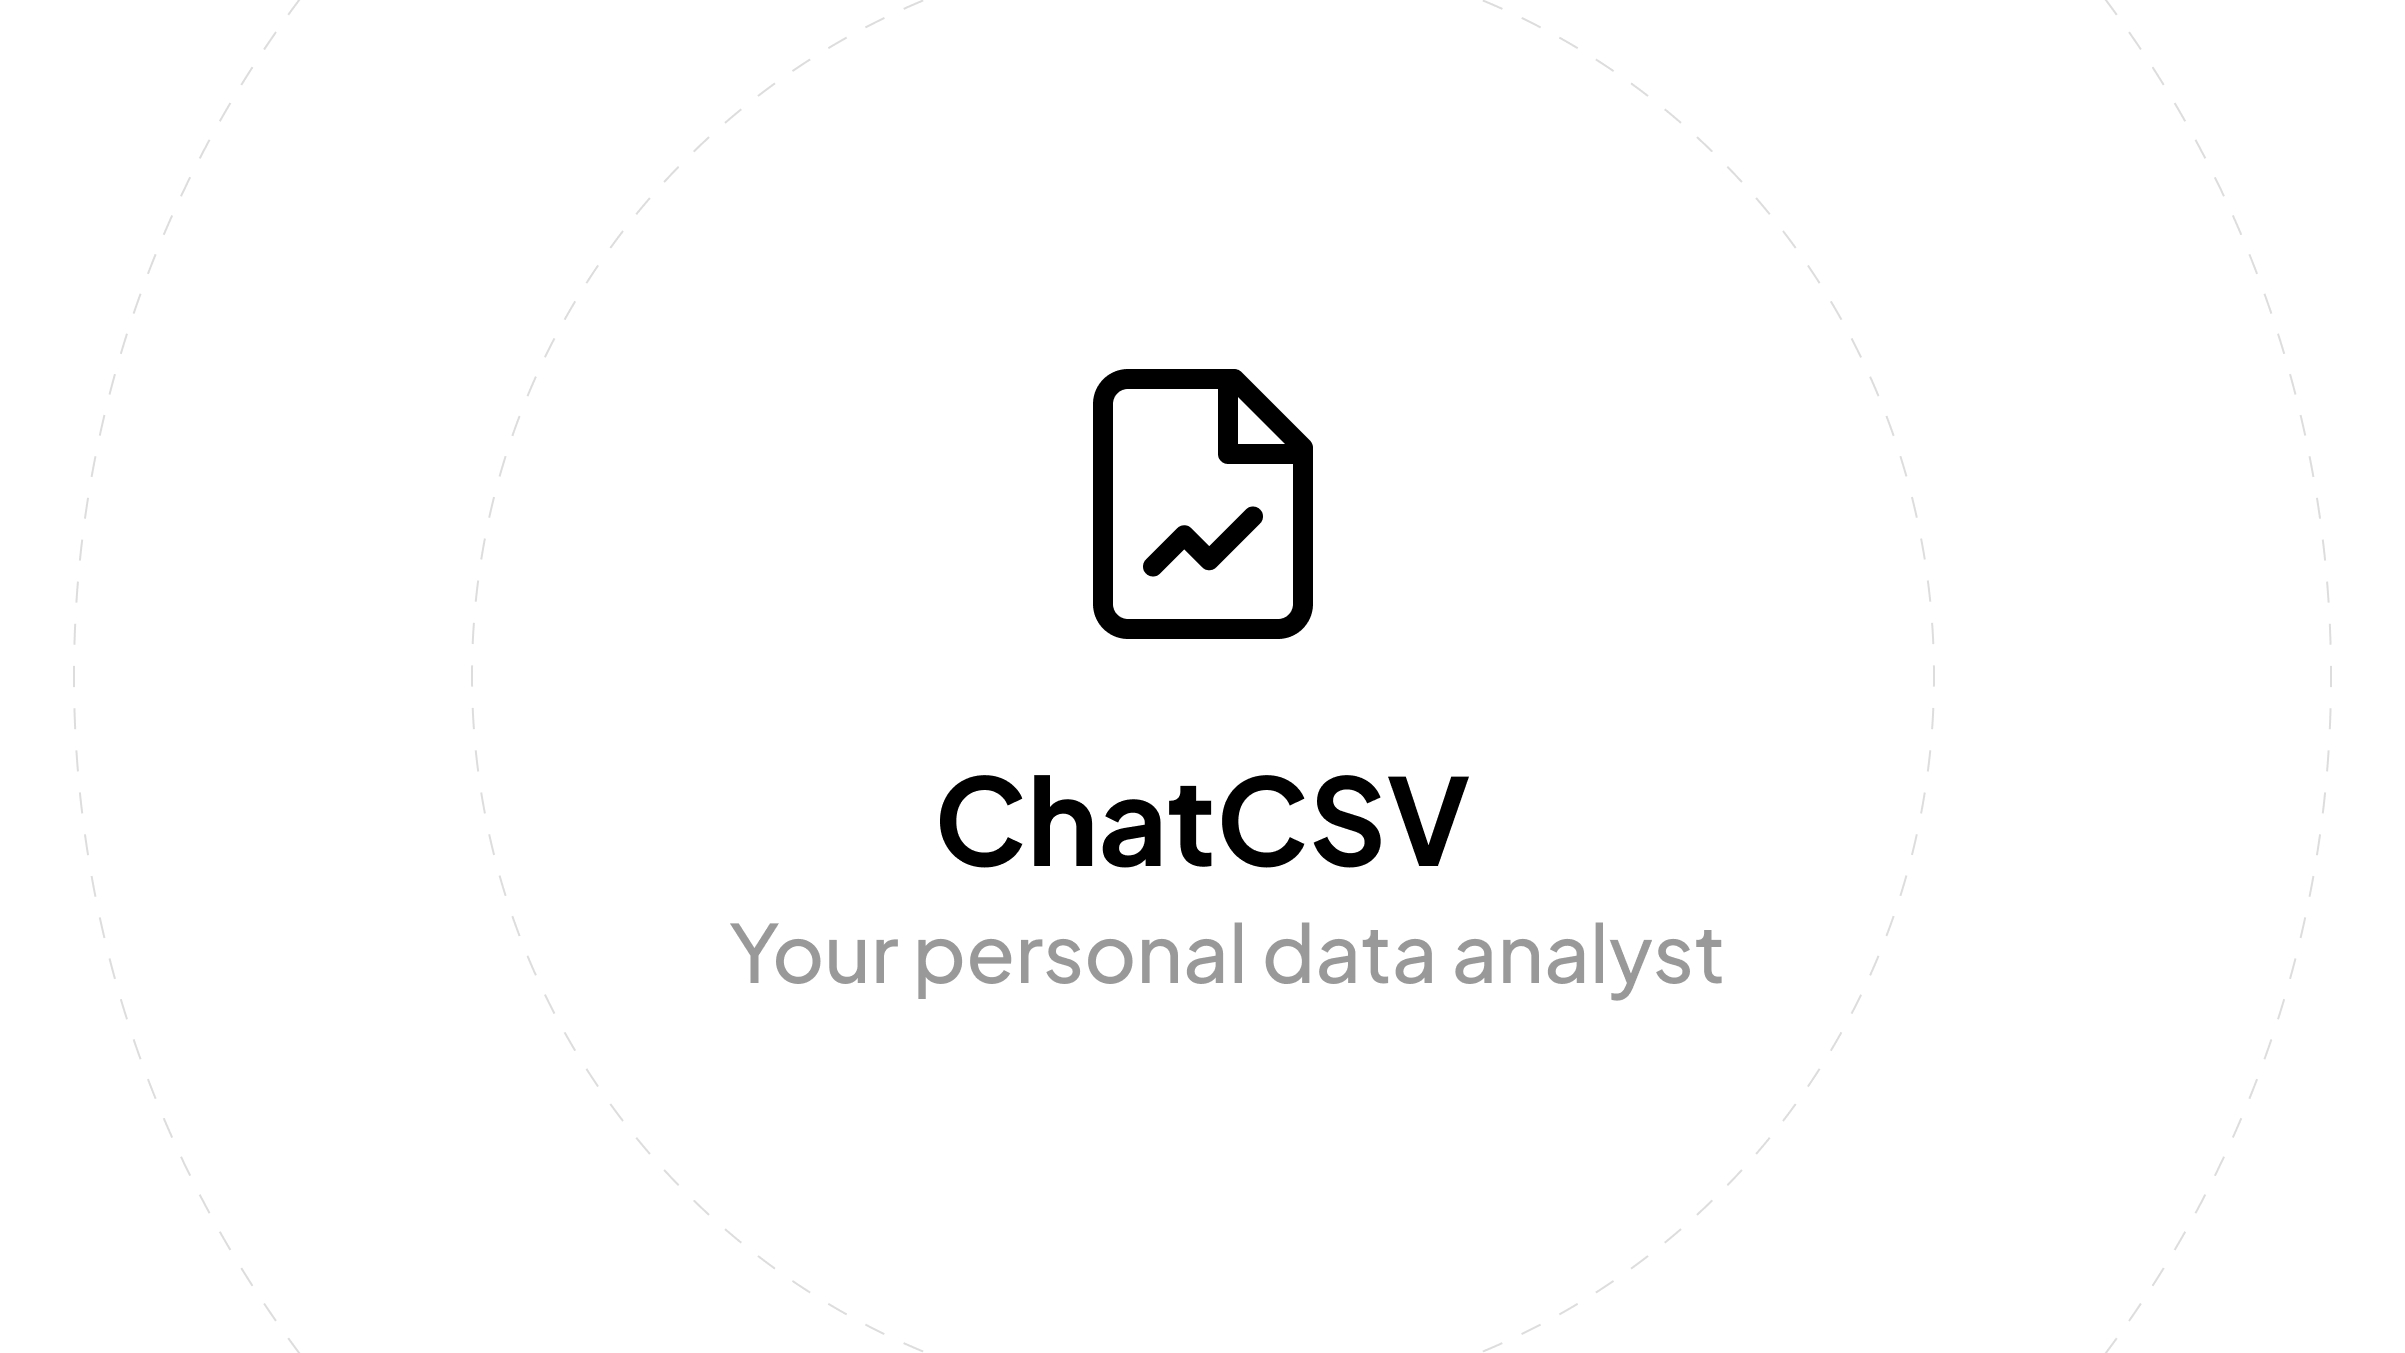 ChatCSV - An assistant that helps users analyze CSV files and ask questions